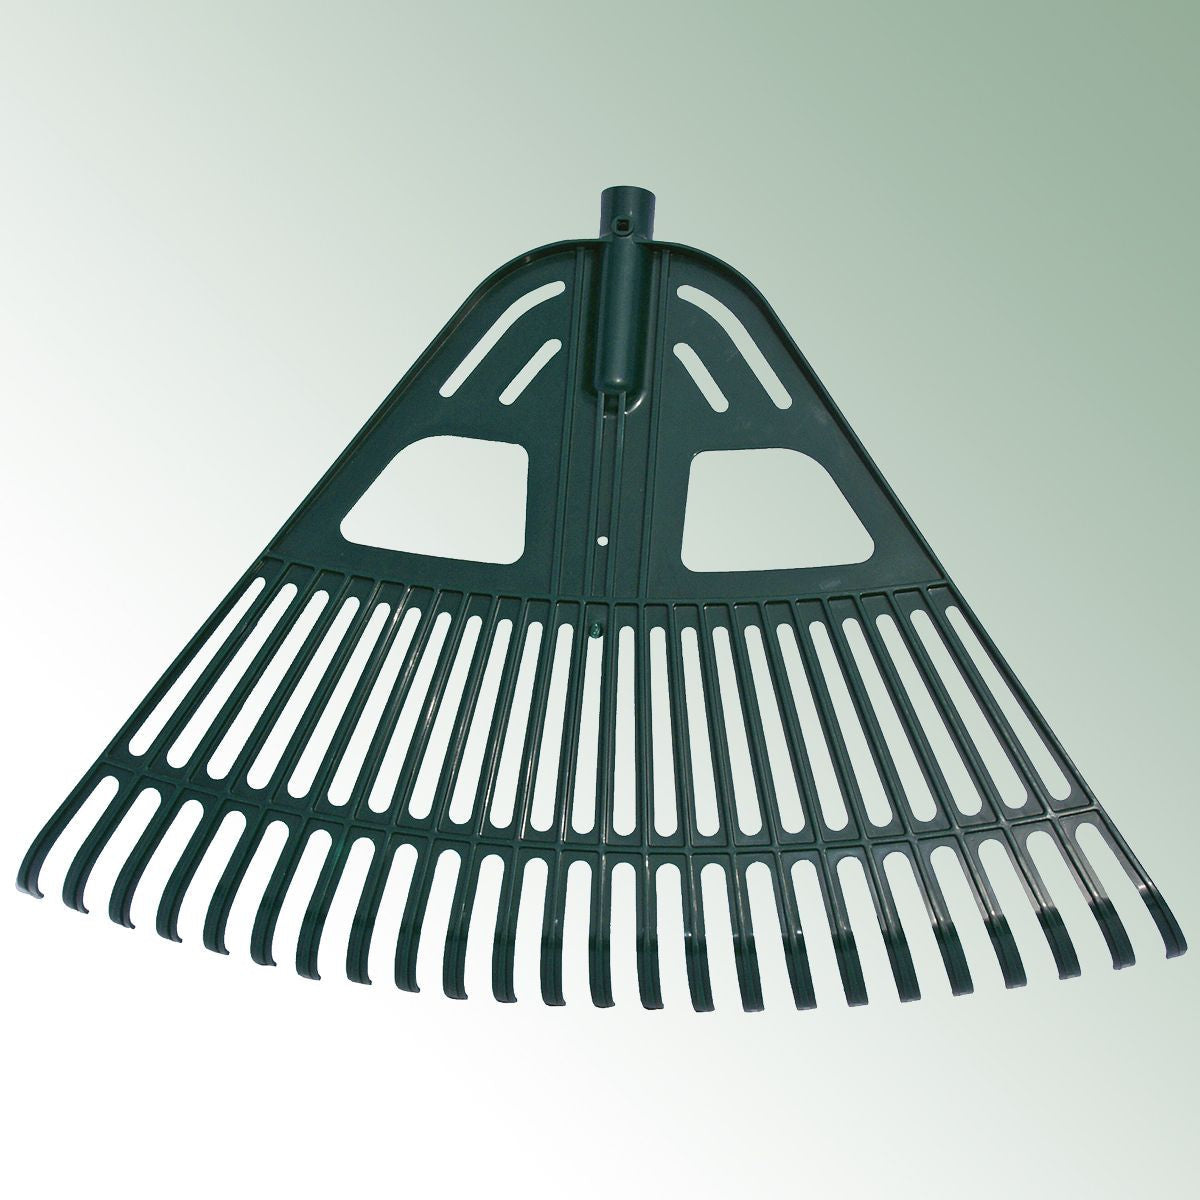 Lawn Rake 64 cm made from plastic